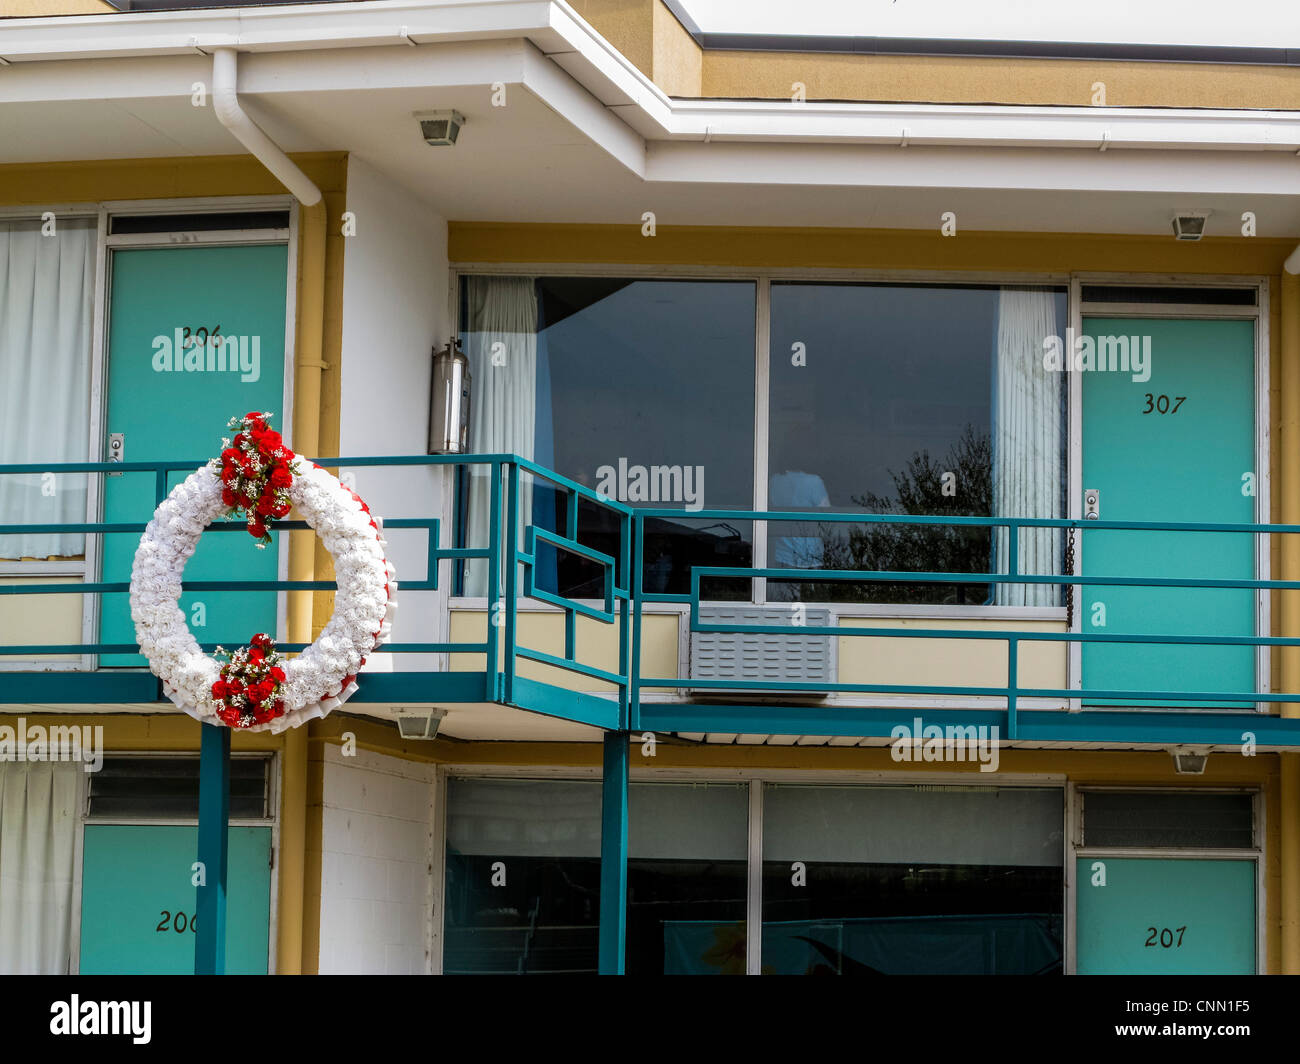 Das National Civil Rights Museum im Lorraine Motel in Memphis, wo Dr. Martin Luther King Jr. im April 1968 ermordet wurde Stockfoto